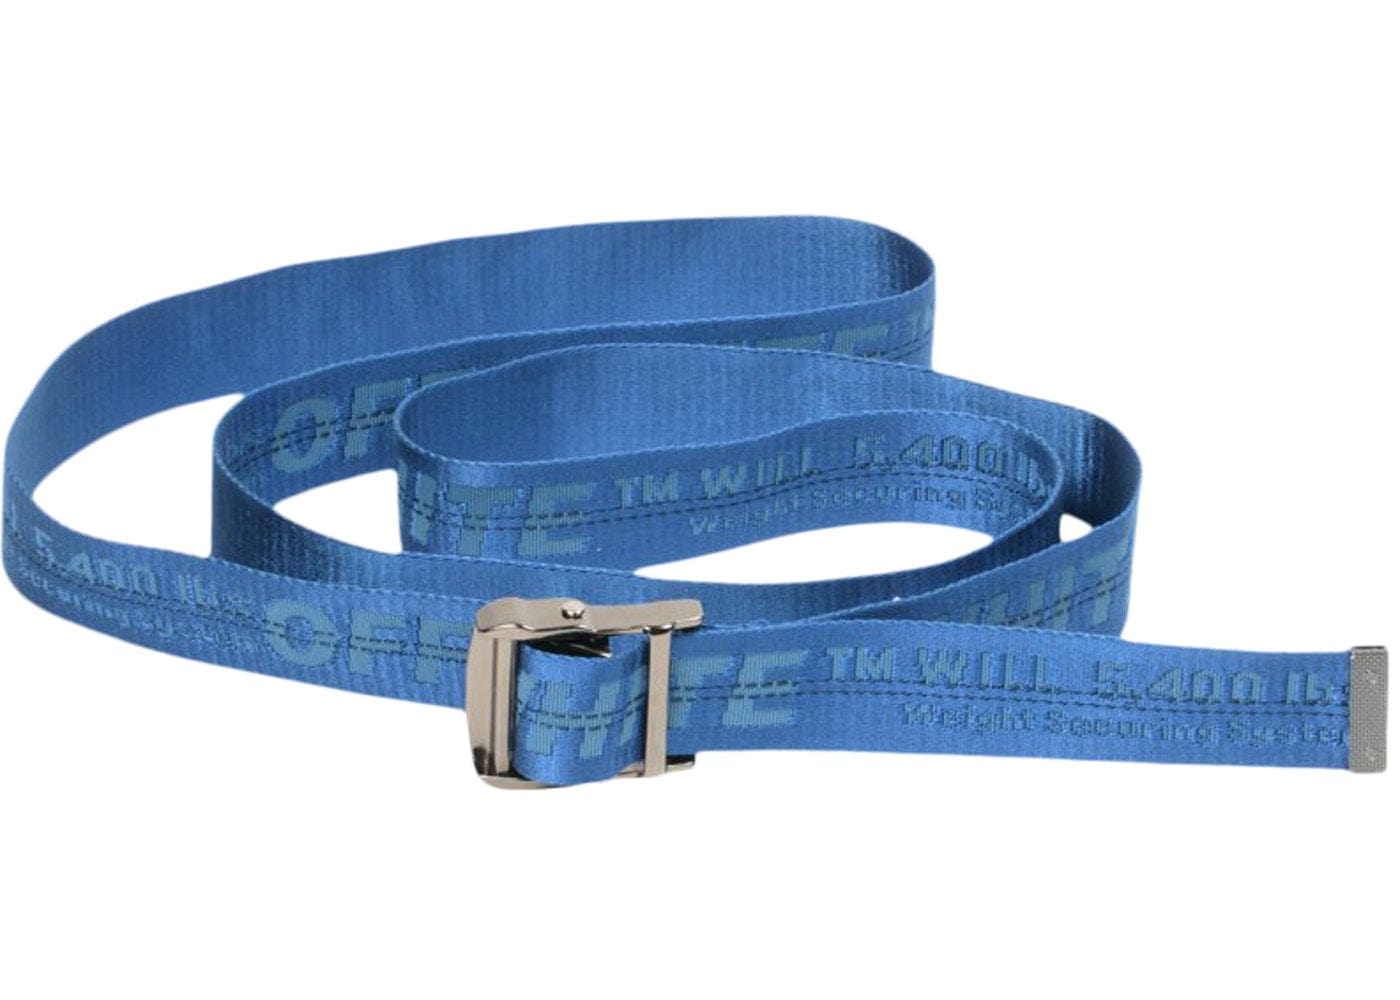 OFF WHITE ACCESSORIES OFF WHITE INDUSTRIAL BELT BLUE BOiB9ZQKy